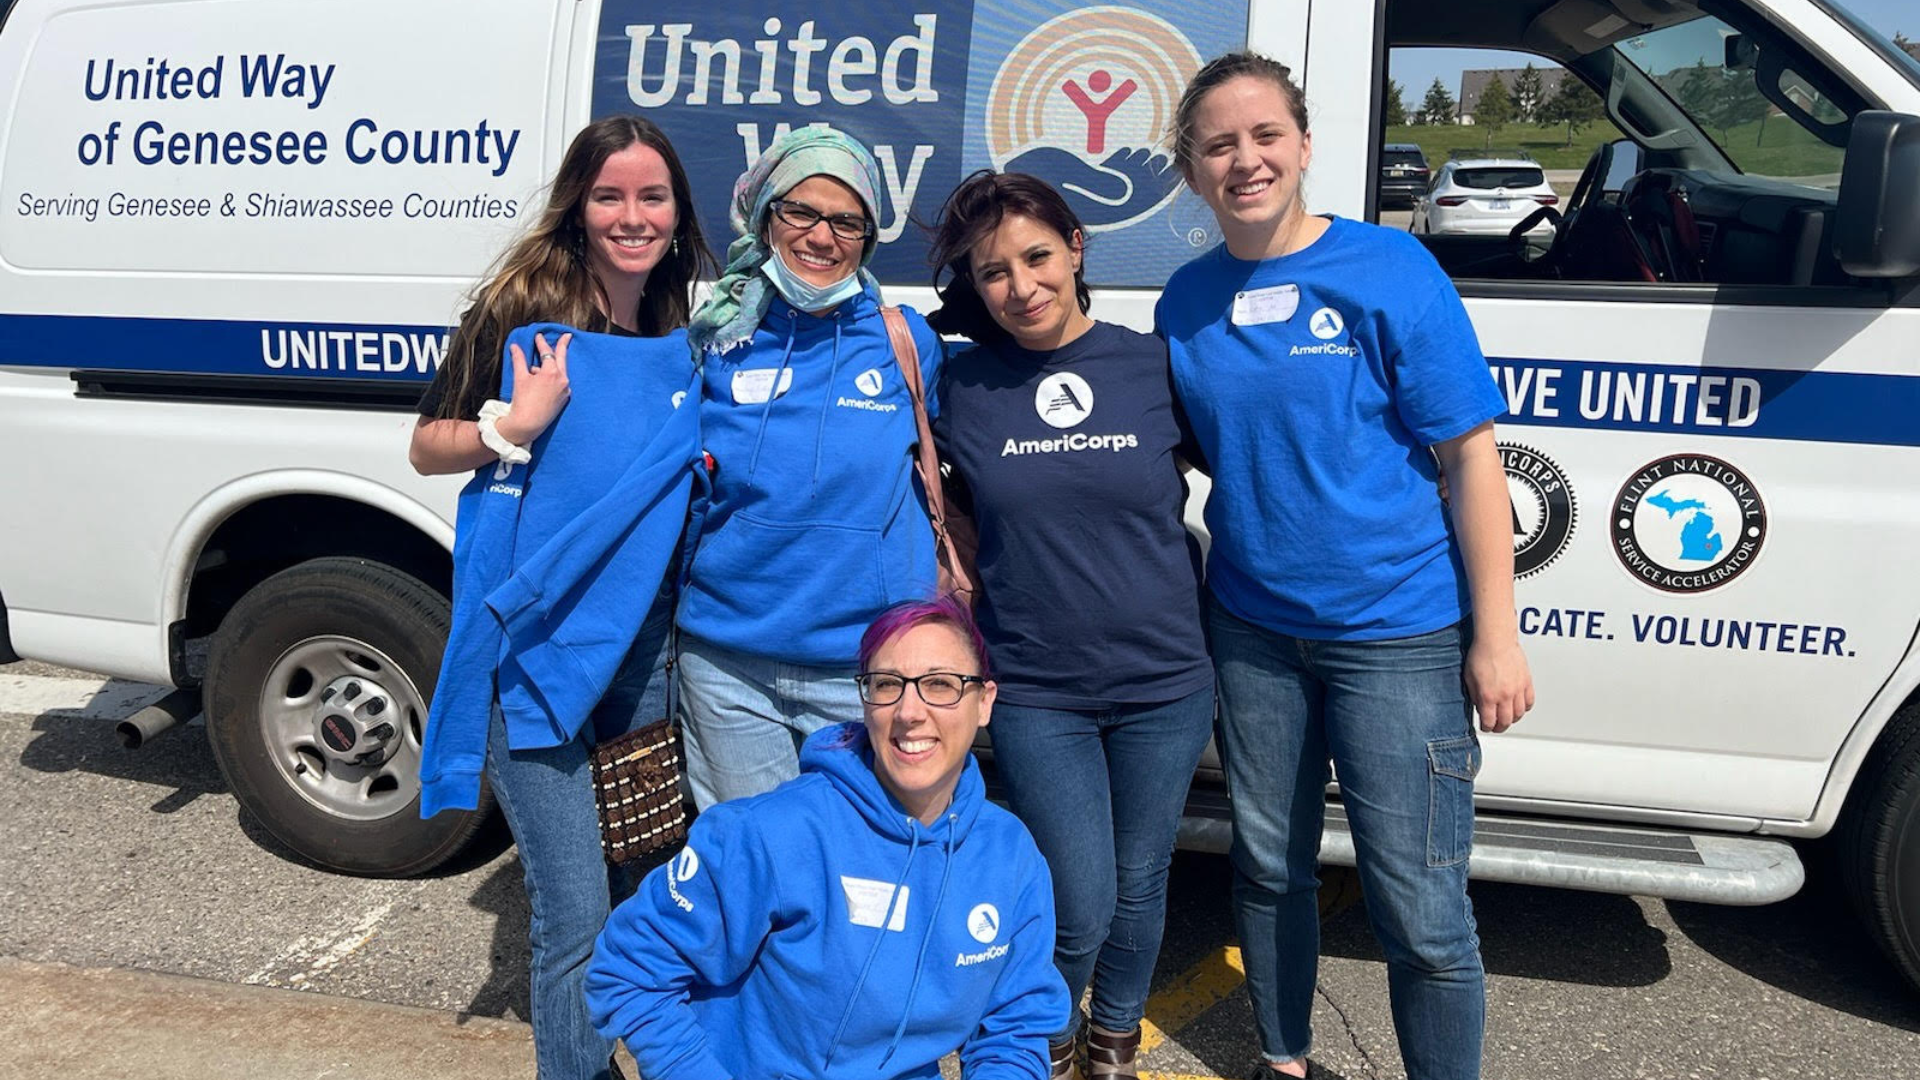 Five women in blue shirts in front of a united way van